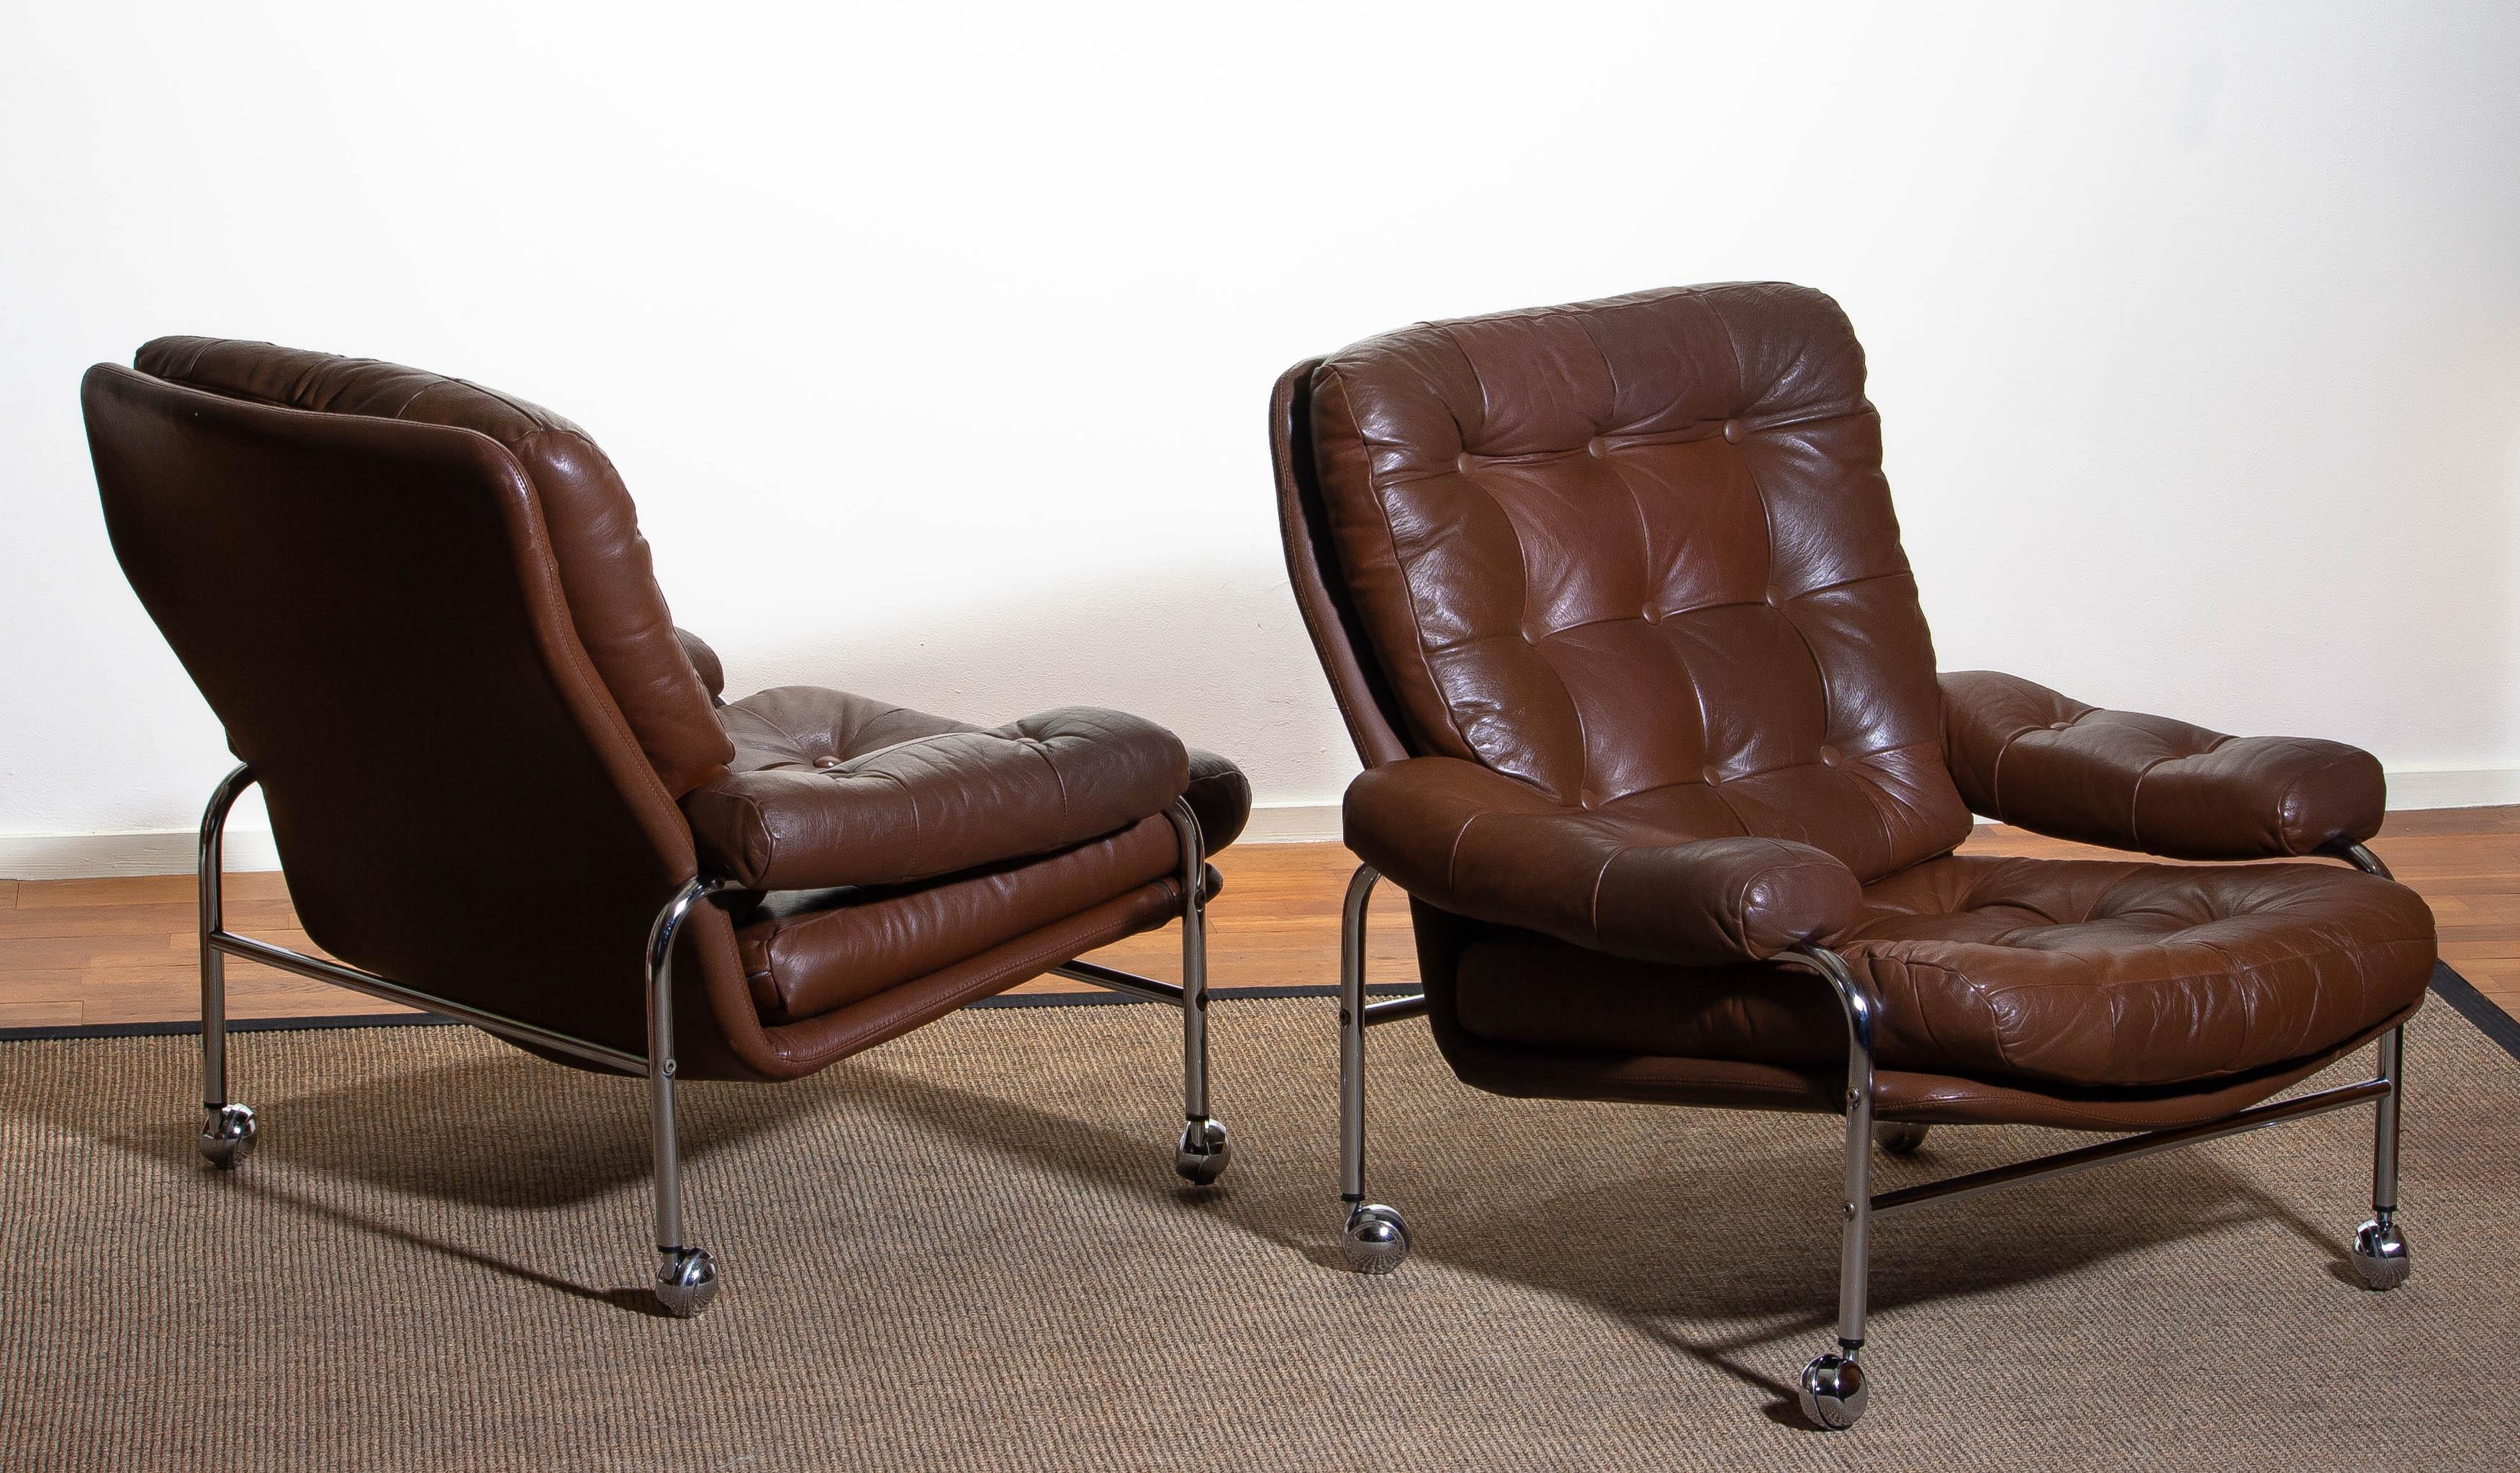 1970s, Chrome and Brown Leather Easy / Lounge Chairs by Scapa Rydaholm, Sweden (Moderne der Mitte des Jahrhunderts)